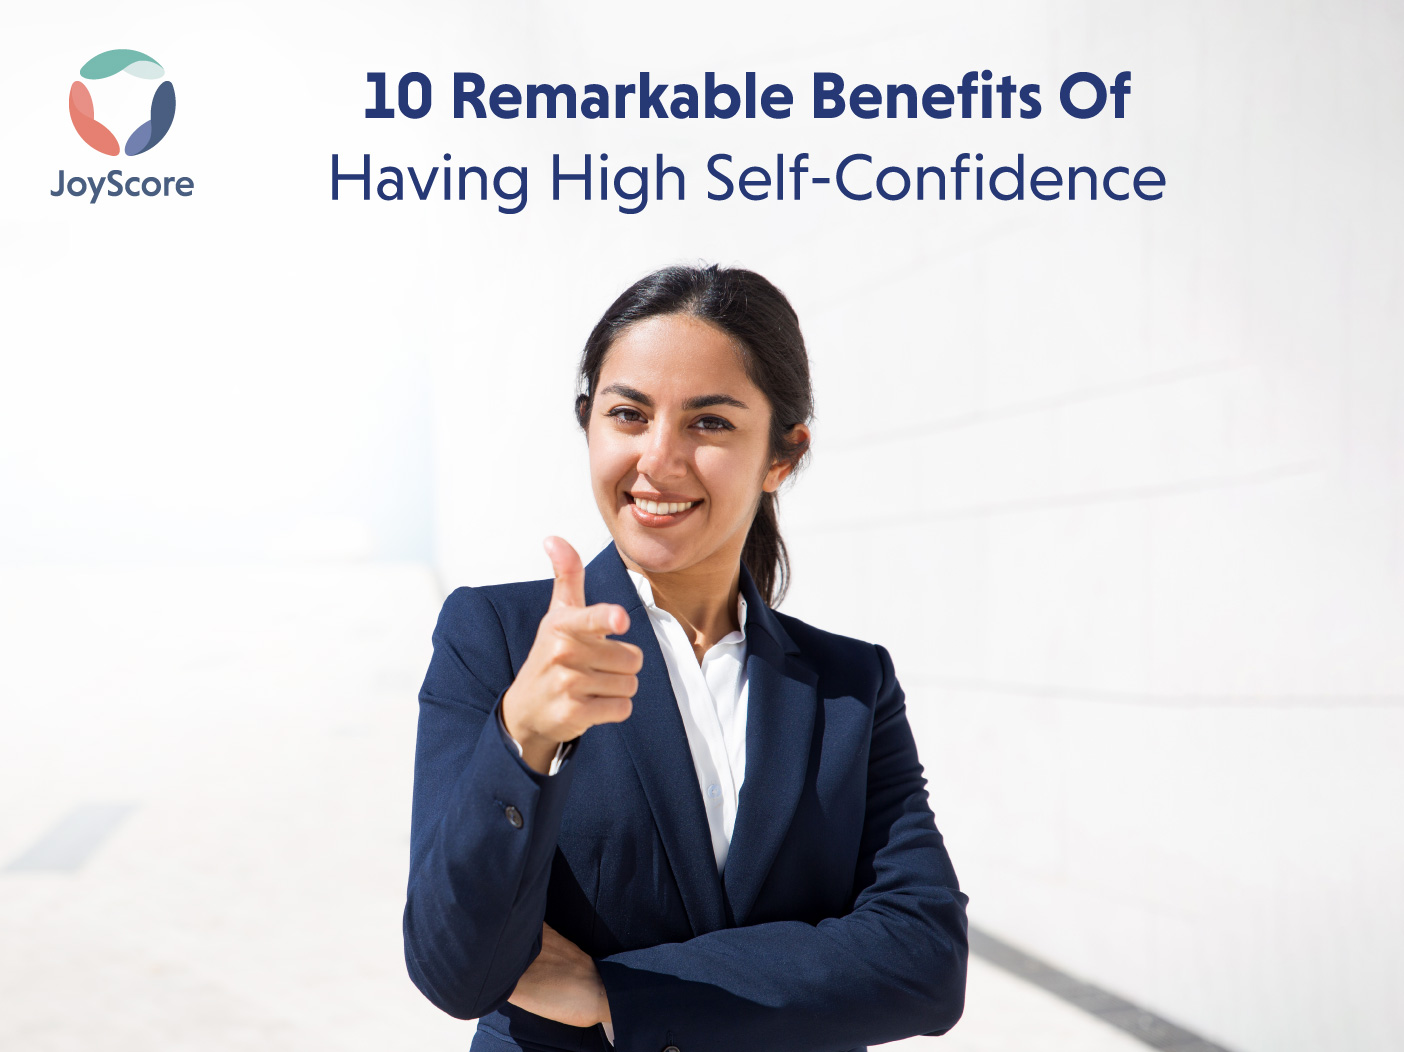 10 Benefits of Self-Confidence That Make it Great